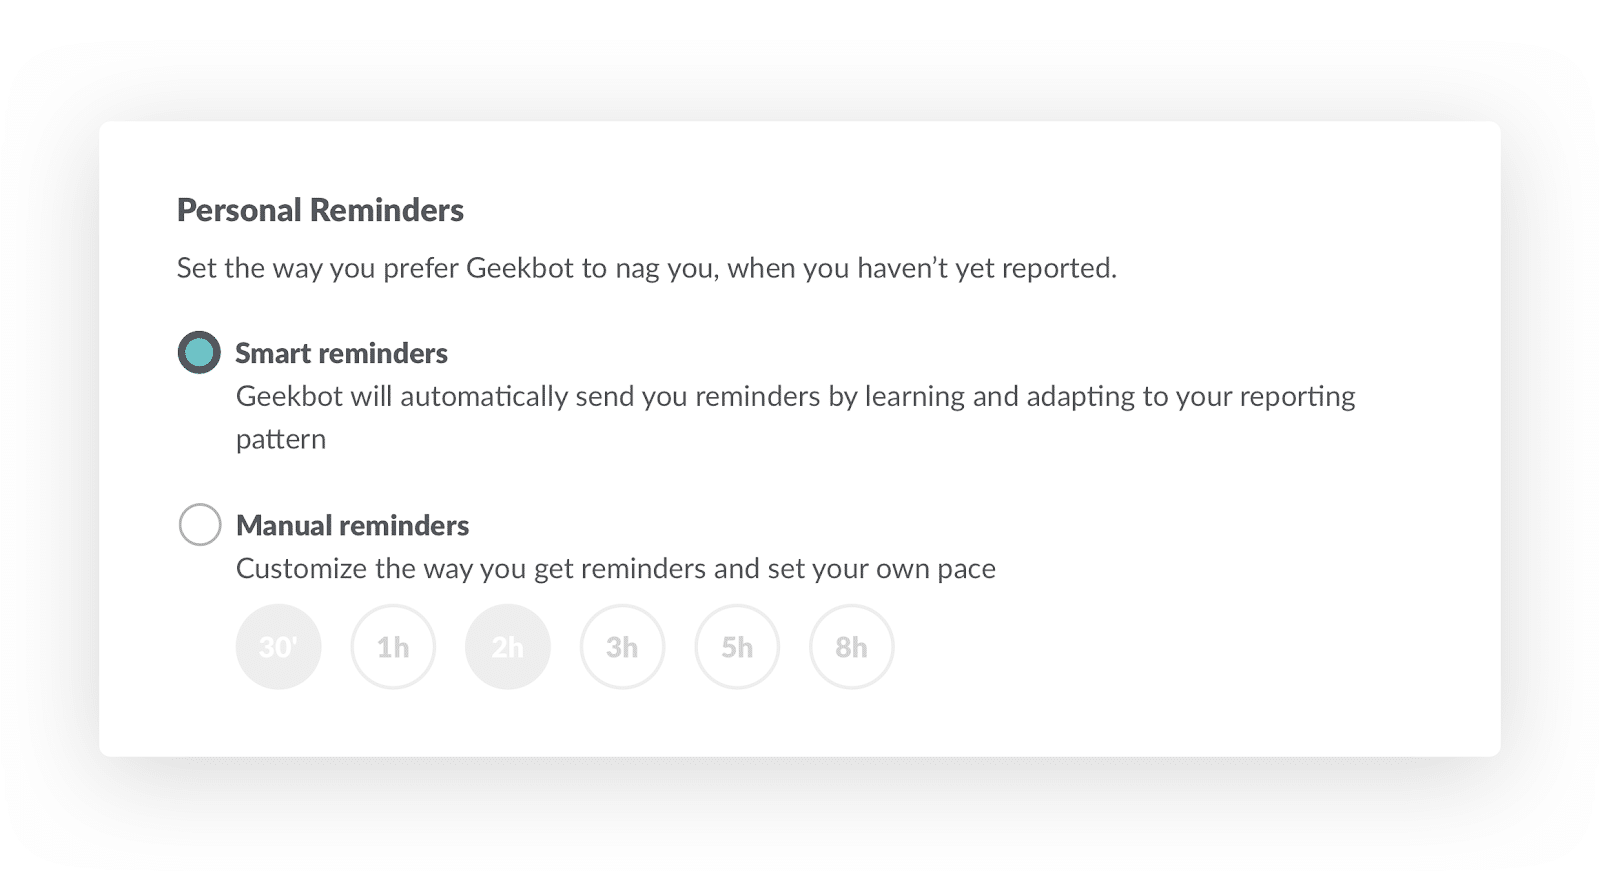 Smart vs Manual Personal Reminders: Set the way you prefer Geekbot to nag you, when you haven't yet reported. 